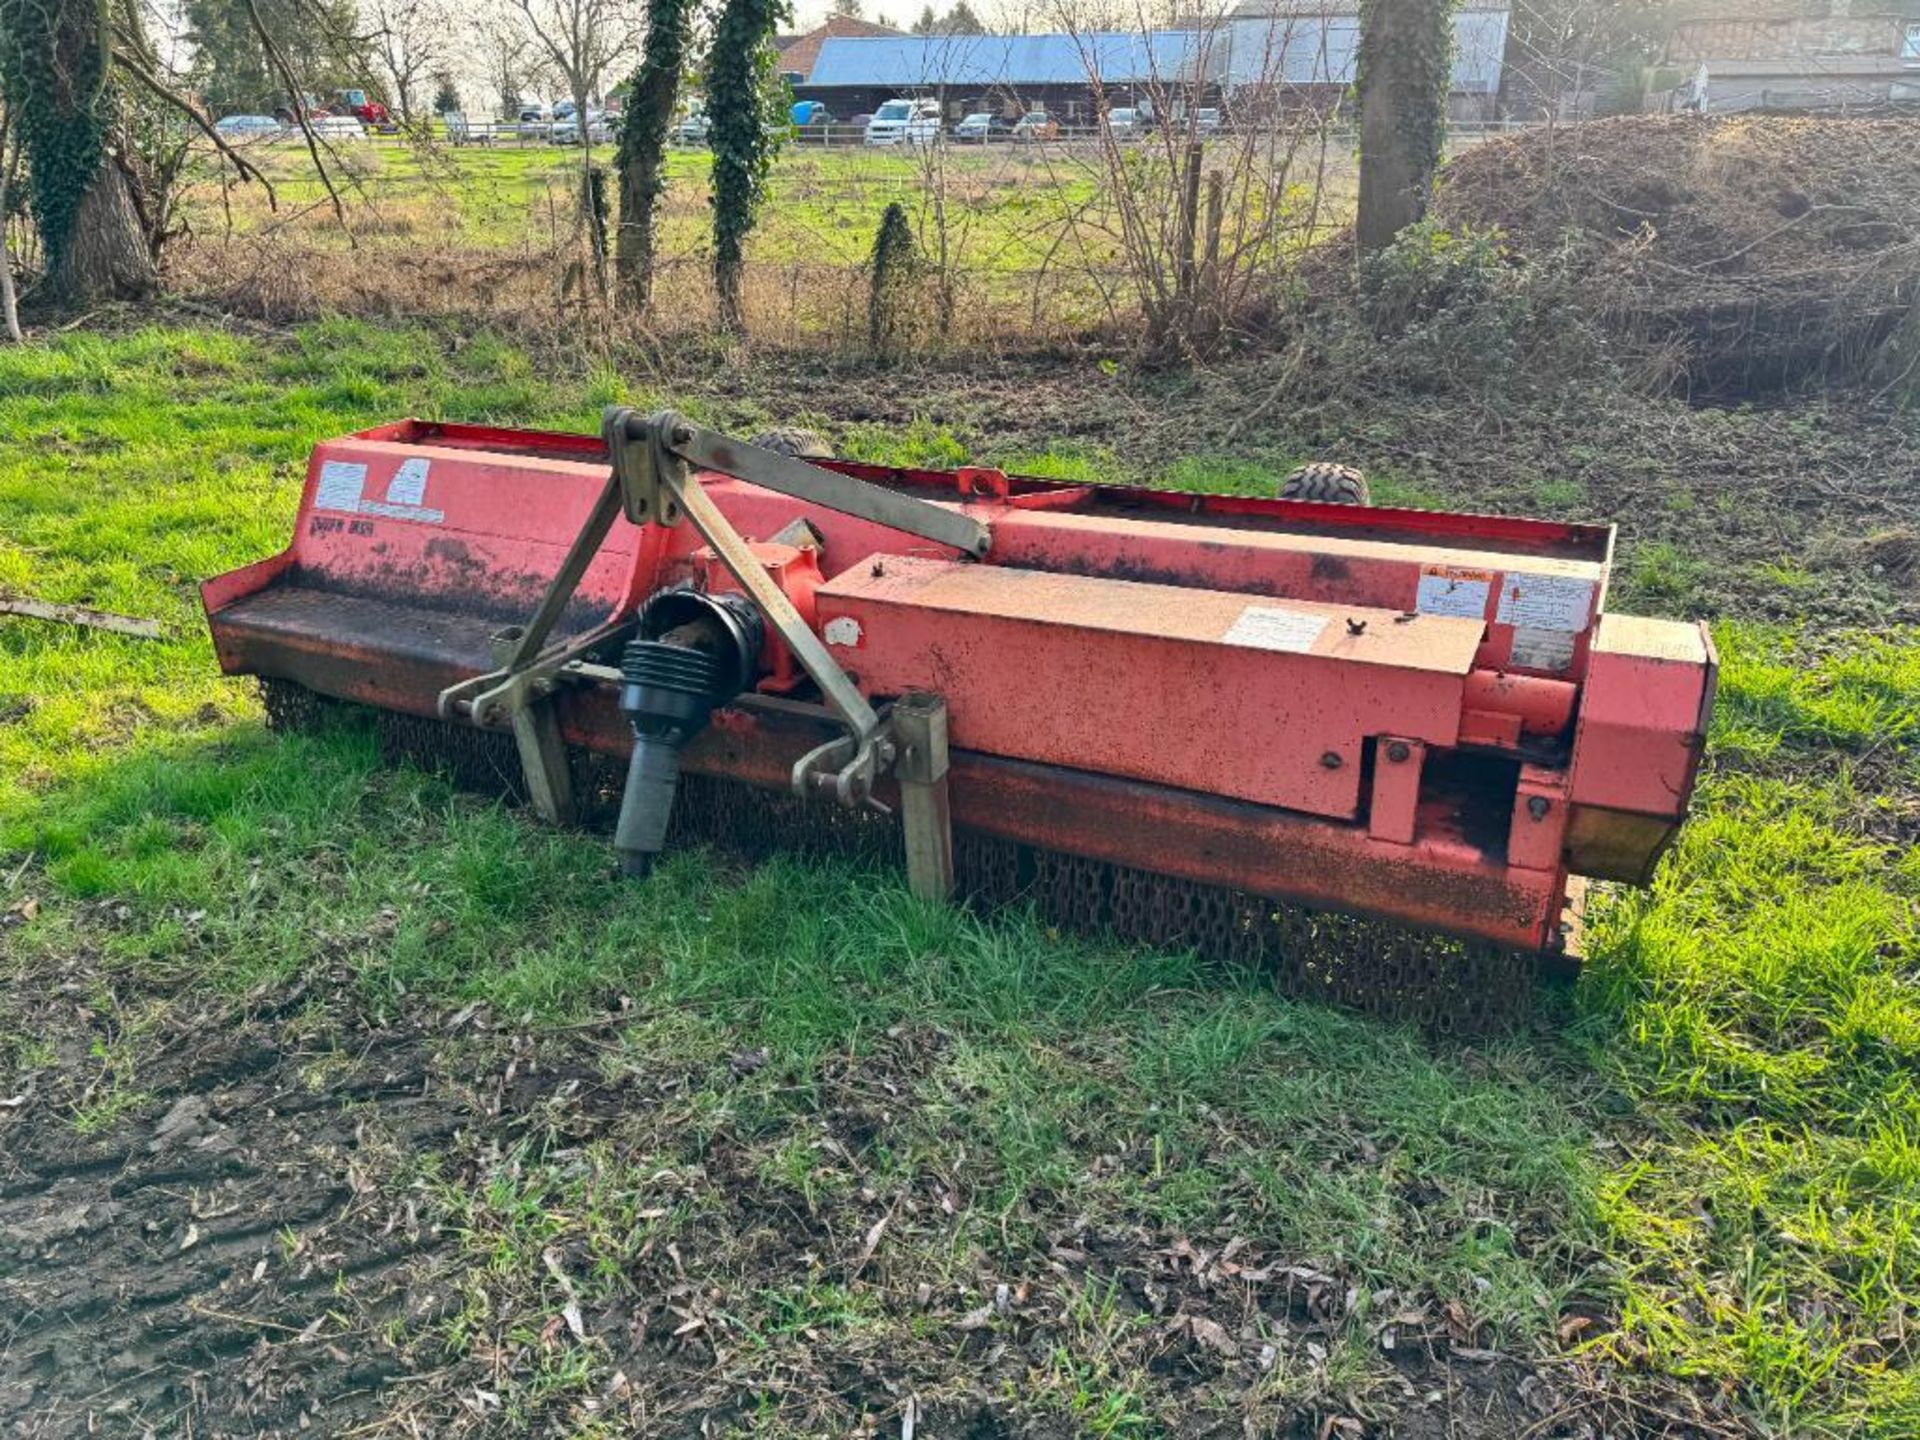 1993 Muratori MT7P 320 3.2m flail mower with spares blades. Serial No: 48503 - Image 8 of 10